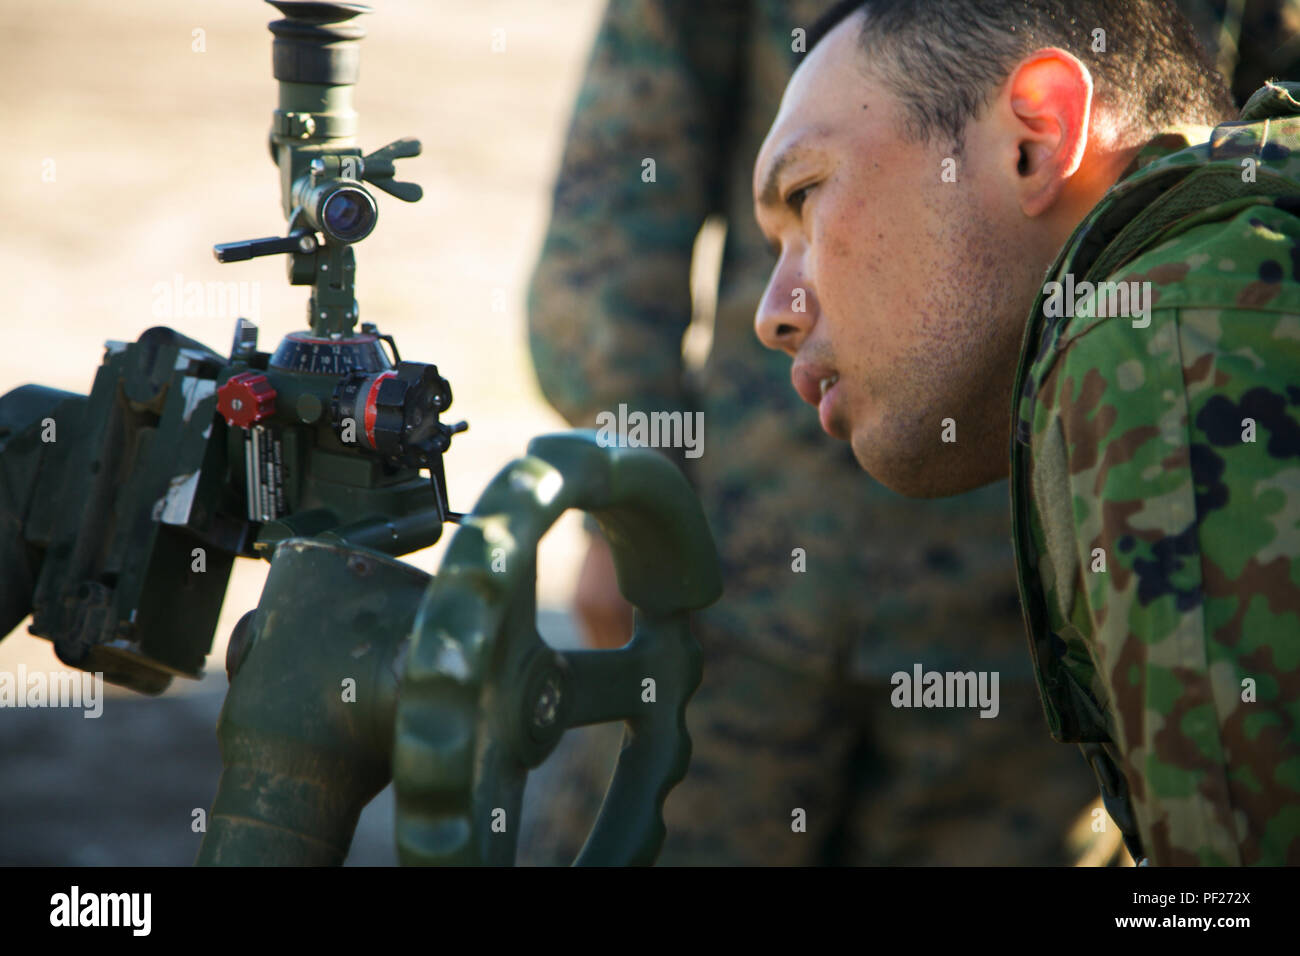 Western Army Infantry Regiment, Japan Ground Self-Defense Force, Sergeant Tatsuya Mateabara looks through a sight of a 120mm M327 Towed Rifled Mortar System during the Supporting Arms Coordinating Center Exercise (SACCEX) for Iron Fist 2016, aboard San Clemente Island, Calif., Feb. 21, 2016. SACCEX  serves as a cooperative learning tool for the US-Japan partnership through the operation of a SACC, which has developed the USMC and JGSDF’s ability to integrate naval gunfire, mortars and close-air support  as a combined force. (U.S. Marine Corps photo by Cpl. Xzavior T. McNeal/Released) Stock Photo